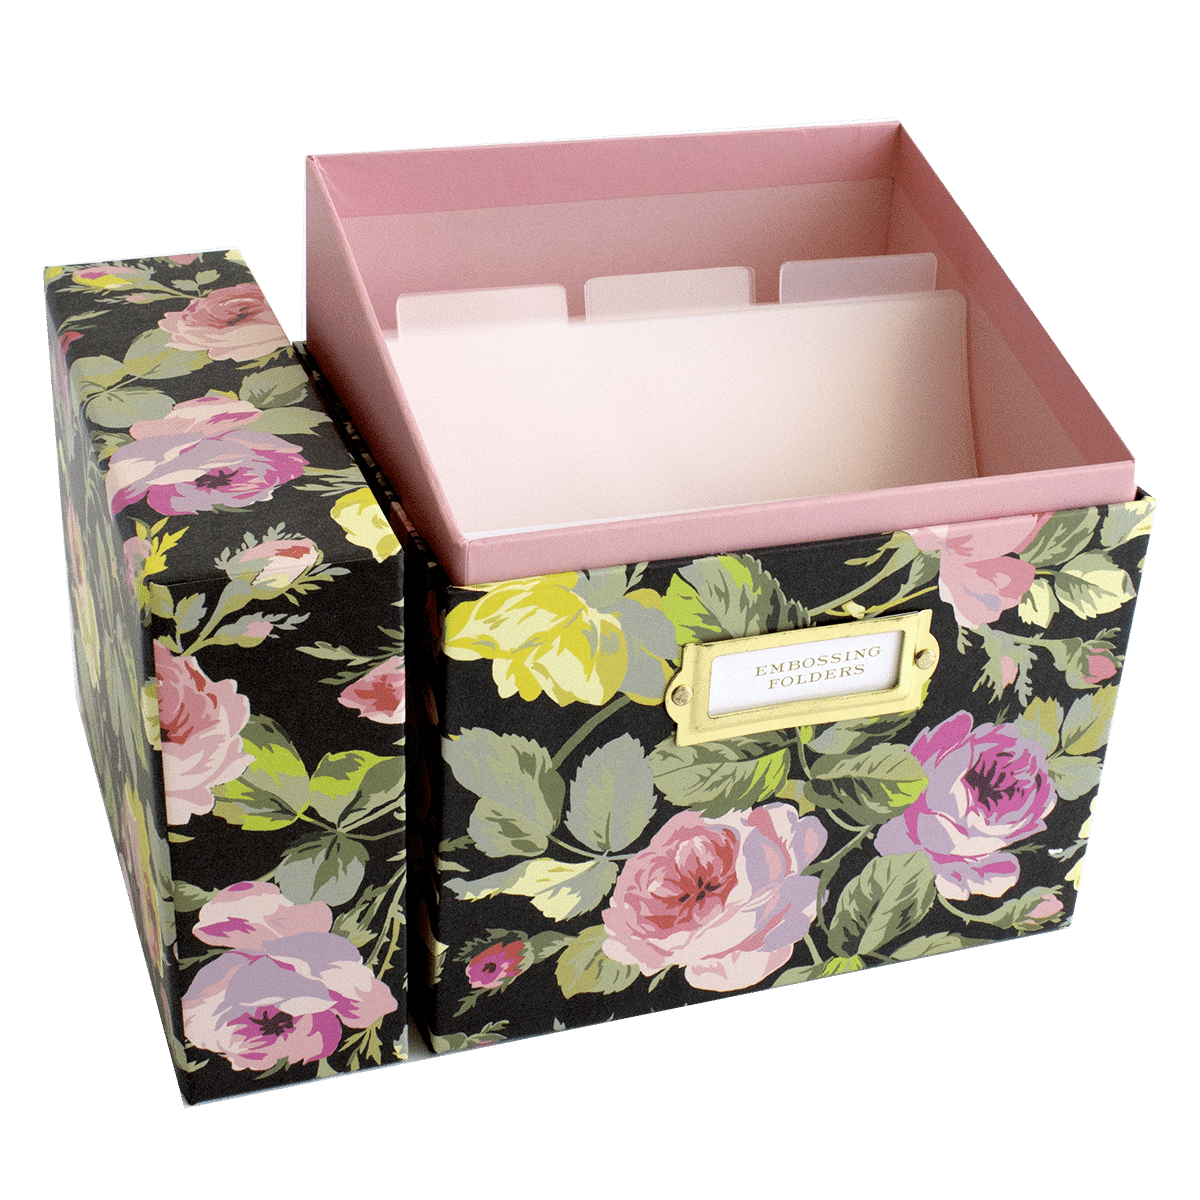 a box with a flower pattern and a pink lid.